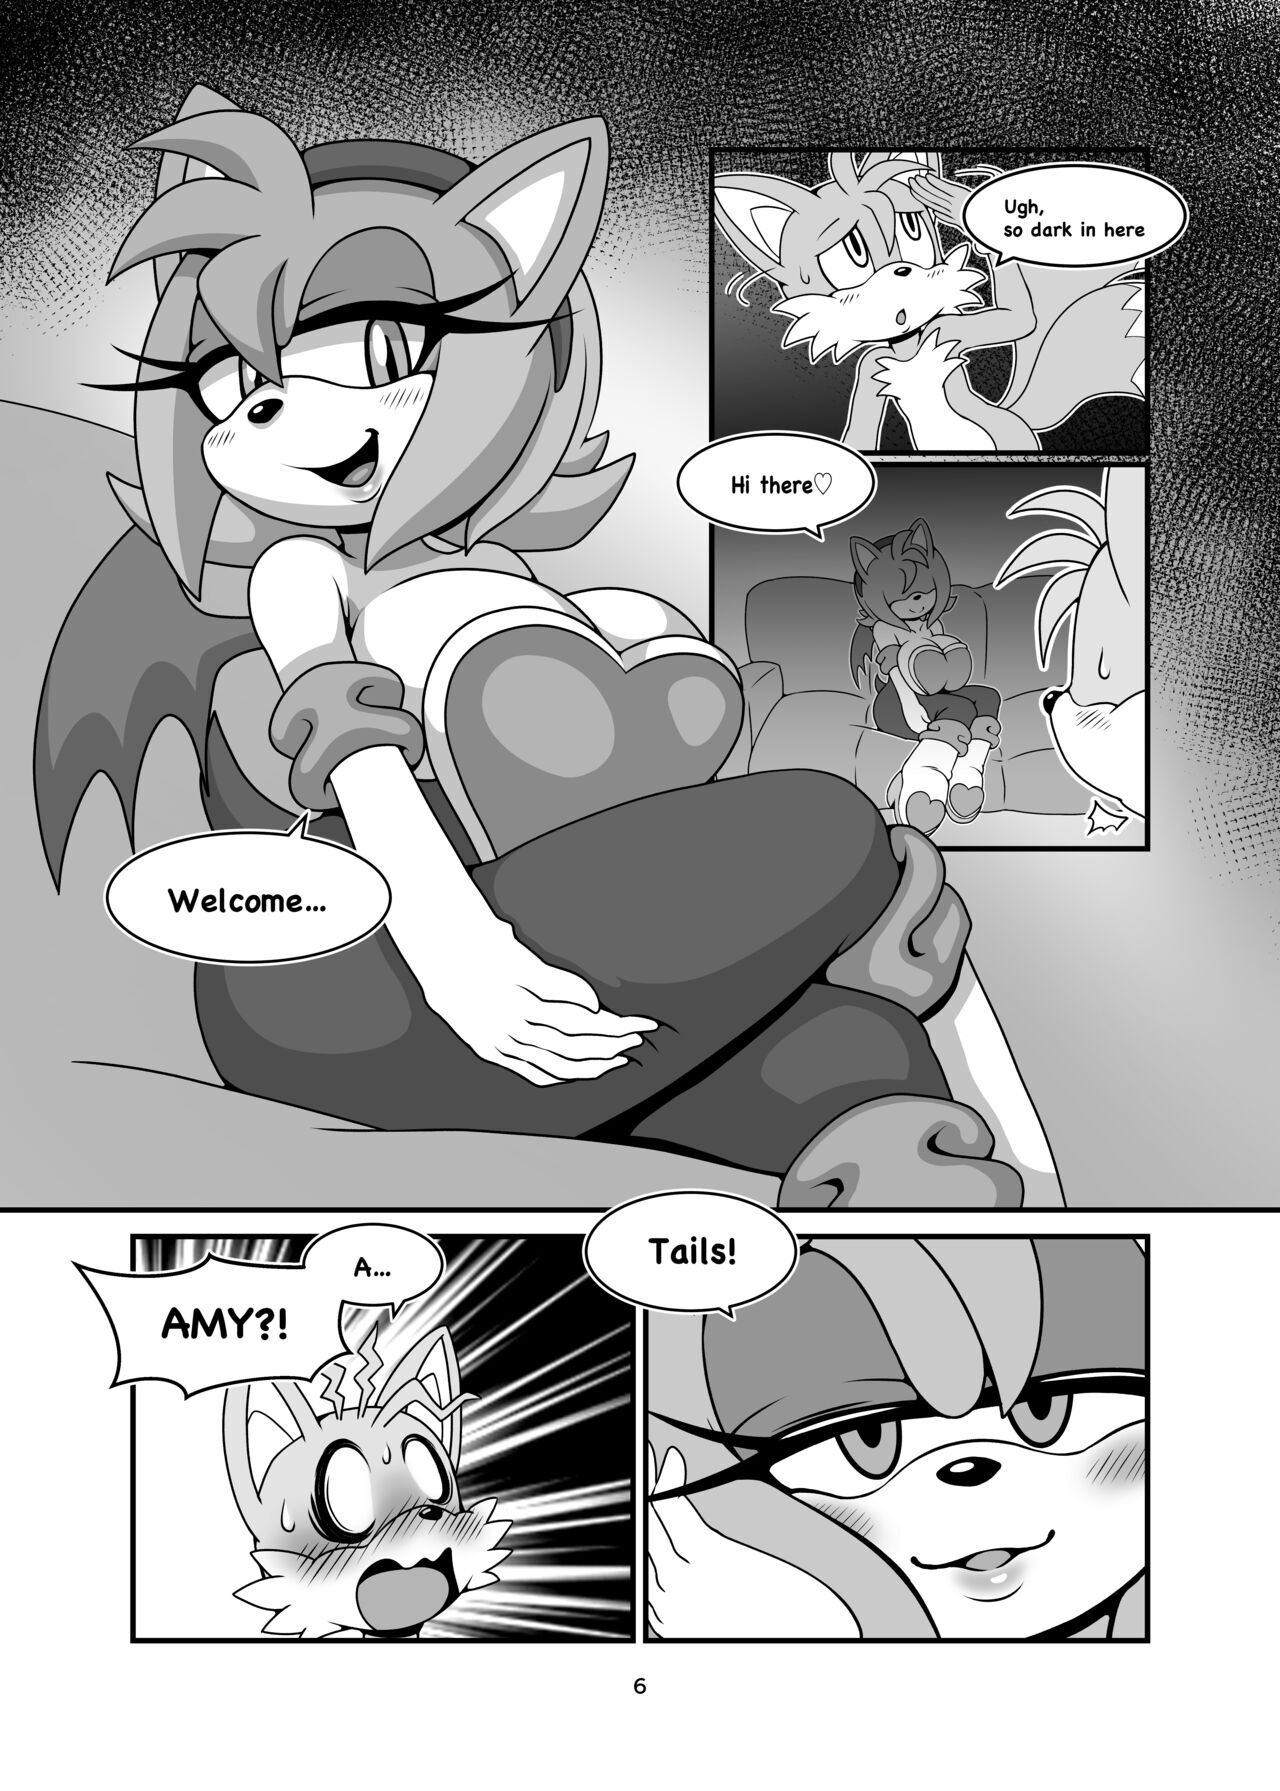 Canned Furry Gaiden 5 - sonic the hedgehog - Free Hentai